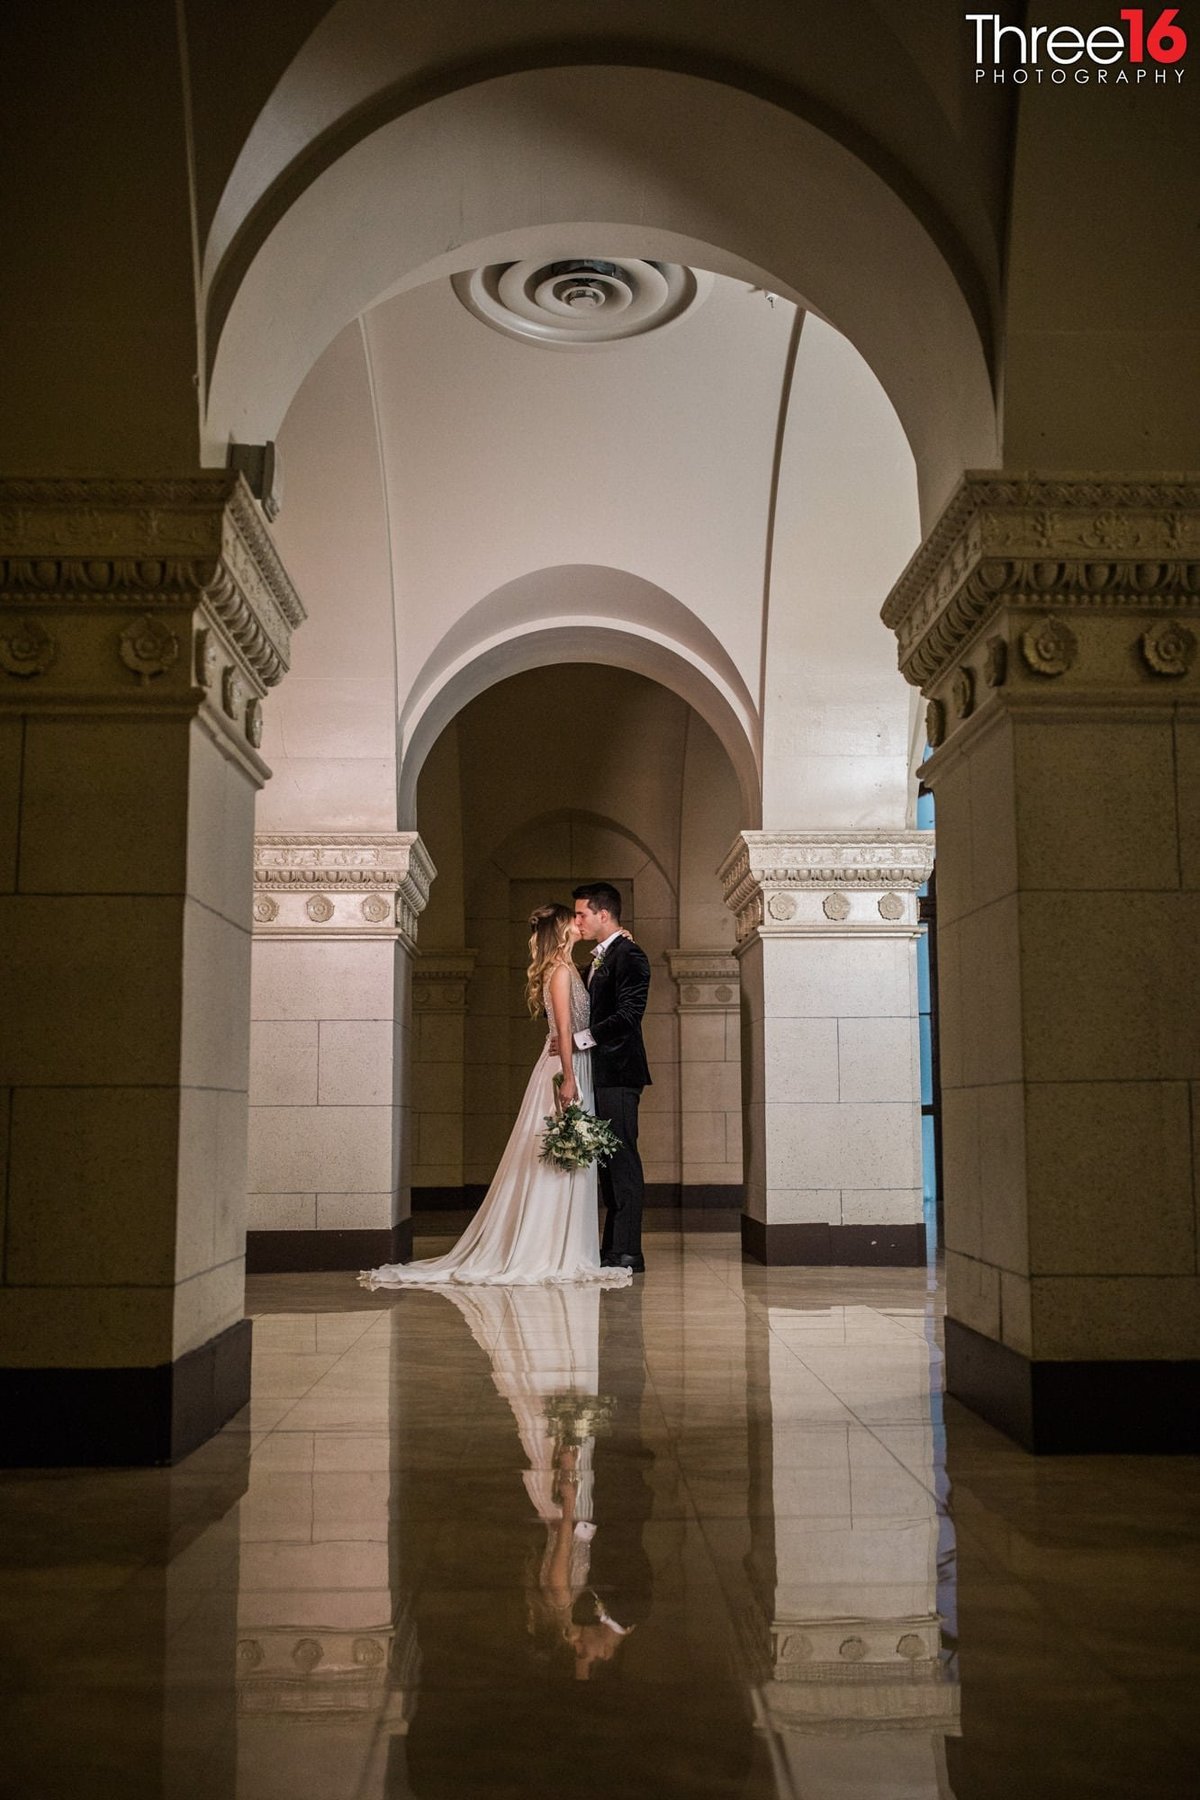 Newly married couple share an intimate kiss under the archway ceiling